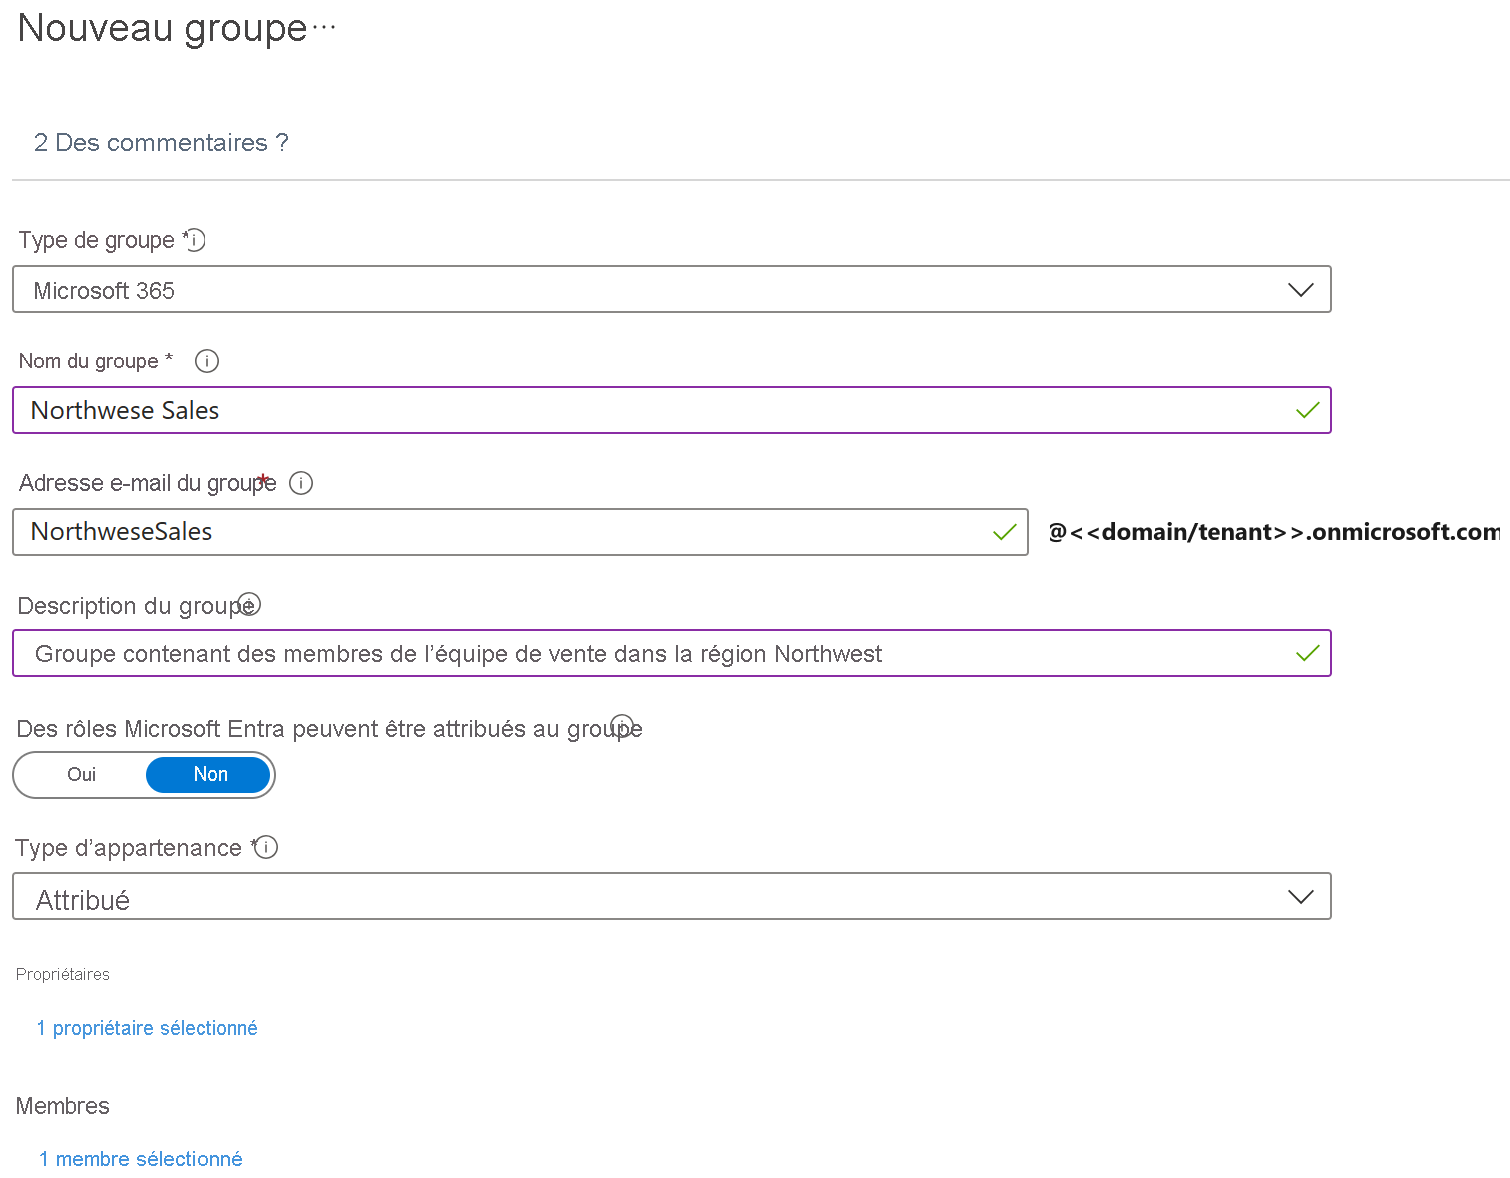 Screenshot of the New Group page with Group type, Group name, Owners, and Members highlighted. When you create a new group you have to set these values.